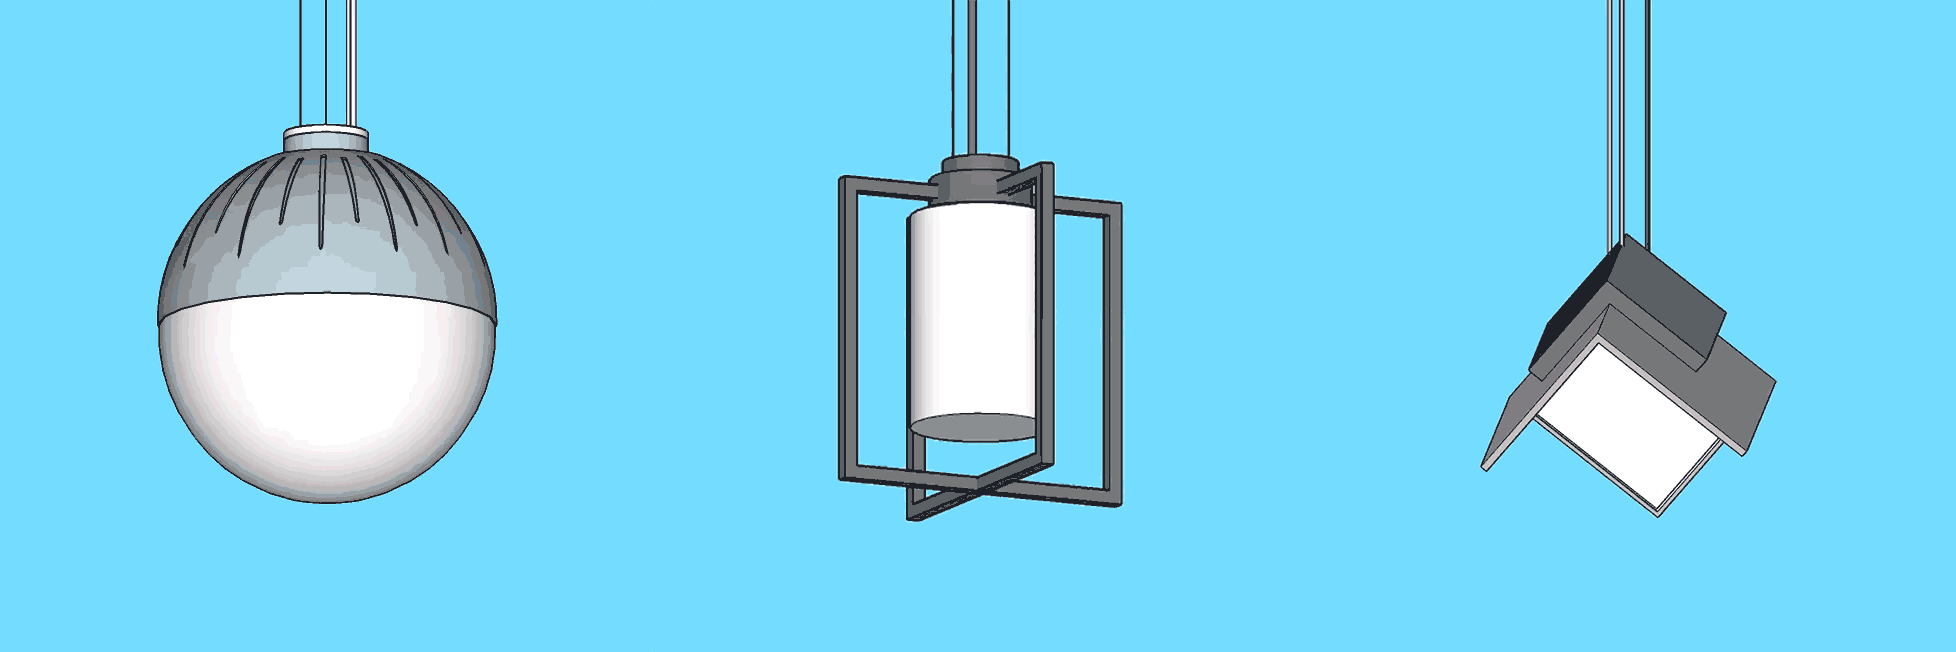 Three of our revit pendant light fixtures in a spinning gif